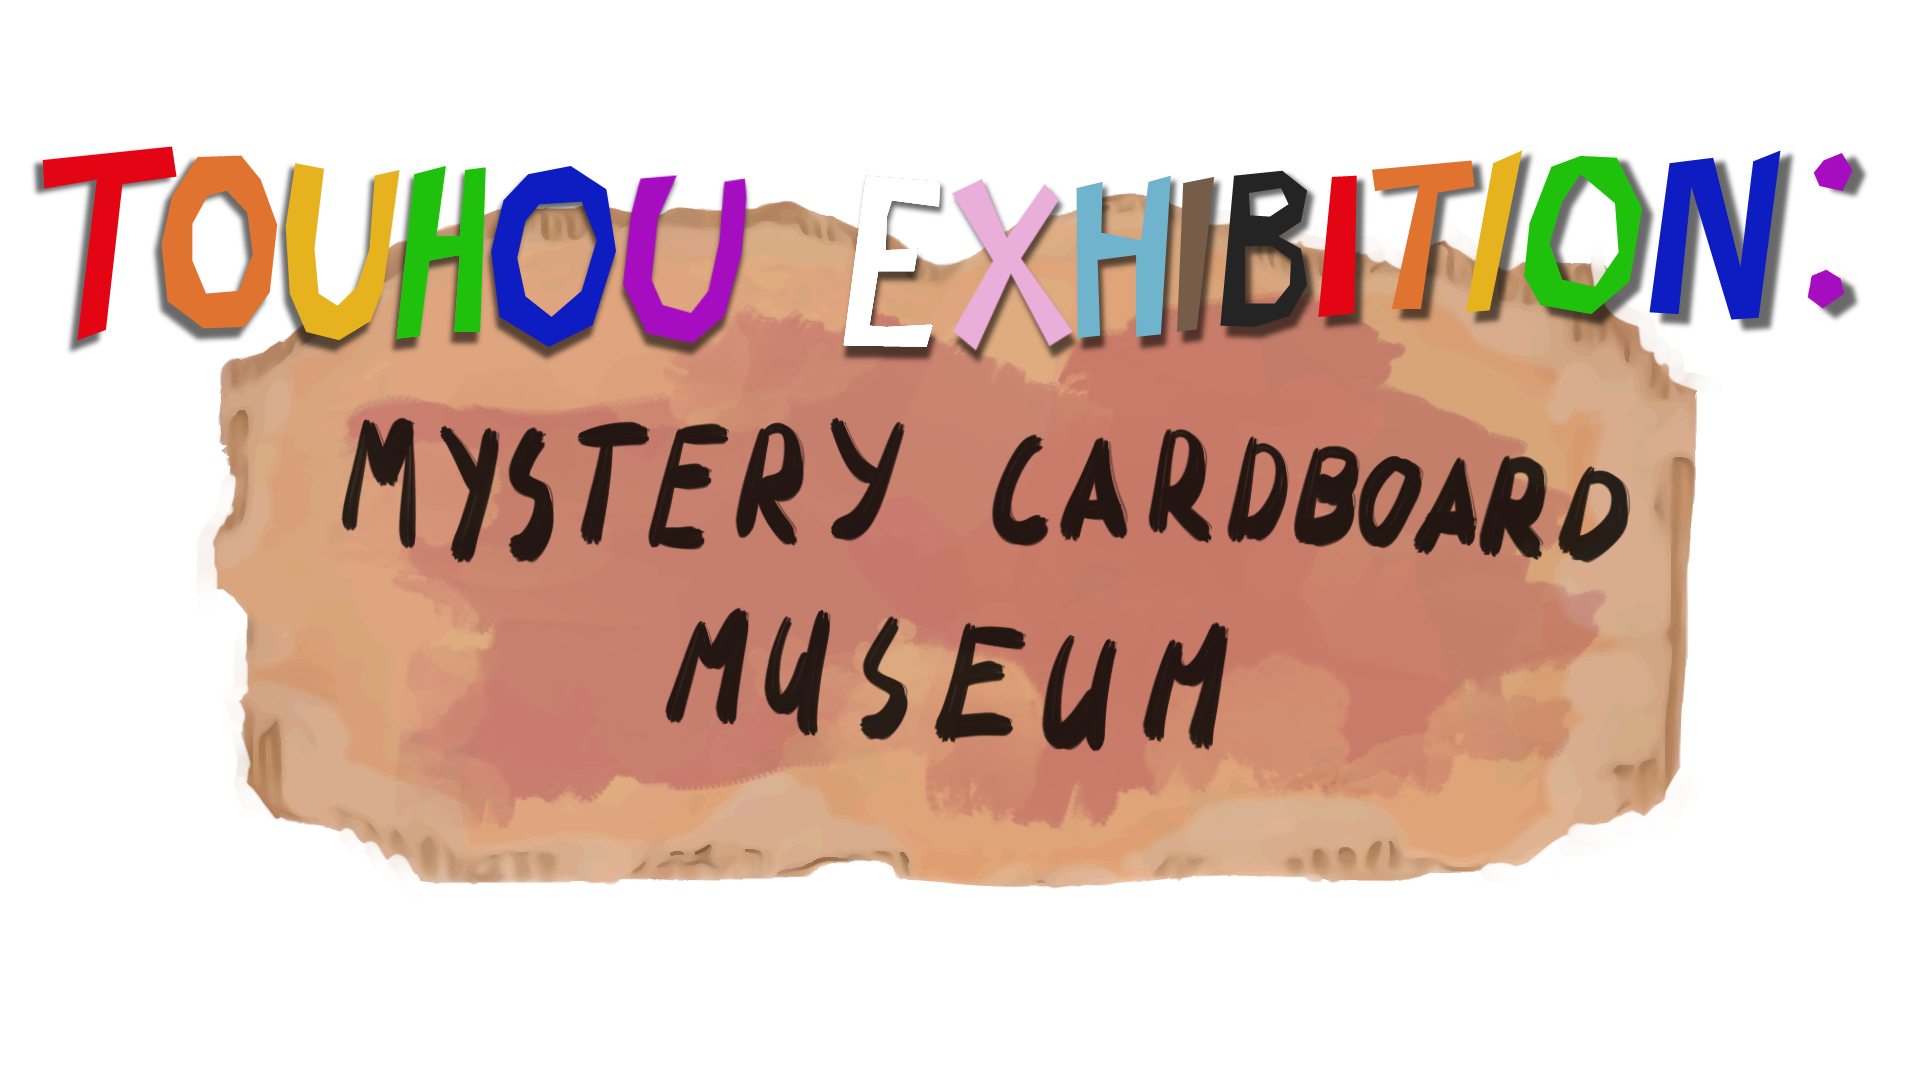 Touhou Exhibition: Mystery Cardboard Museum